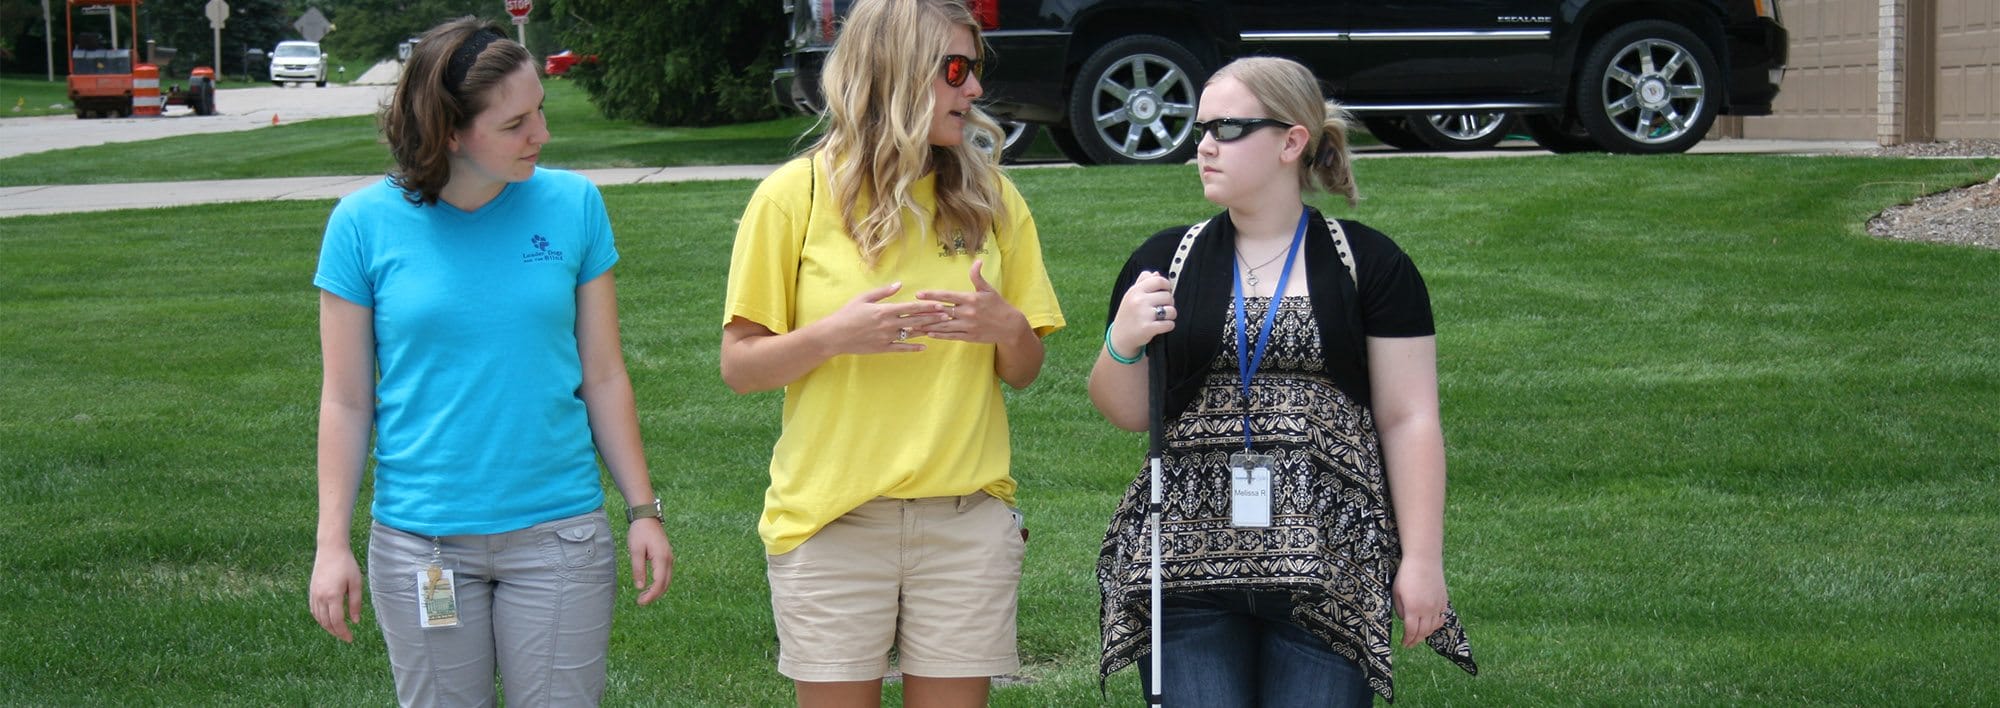 Three young woman stand outdoors in front a lawn. One woman is holding a white cane while the middle woman appears to be talking